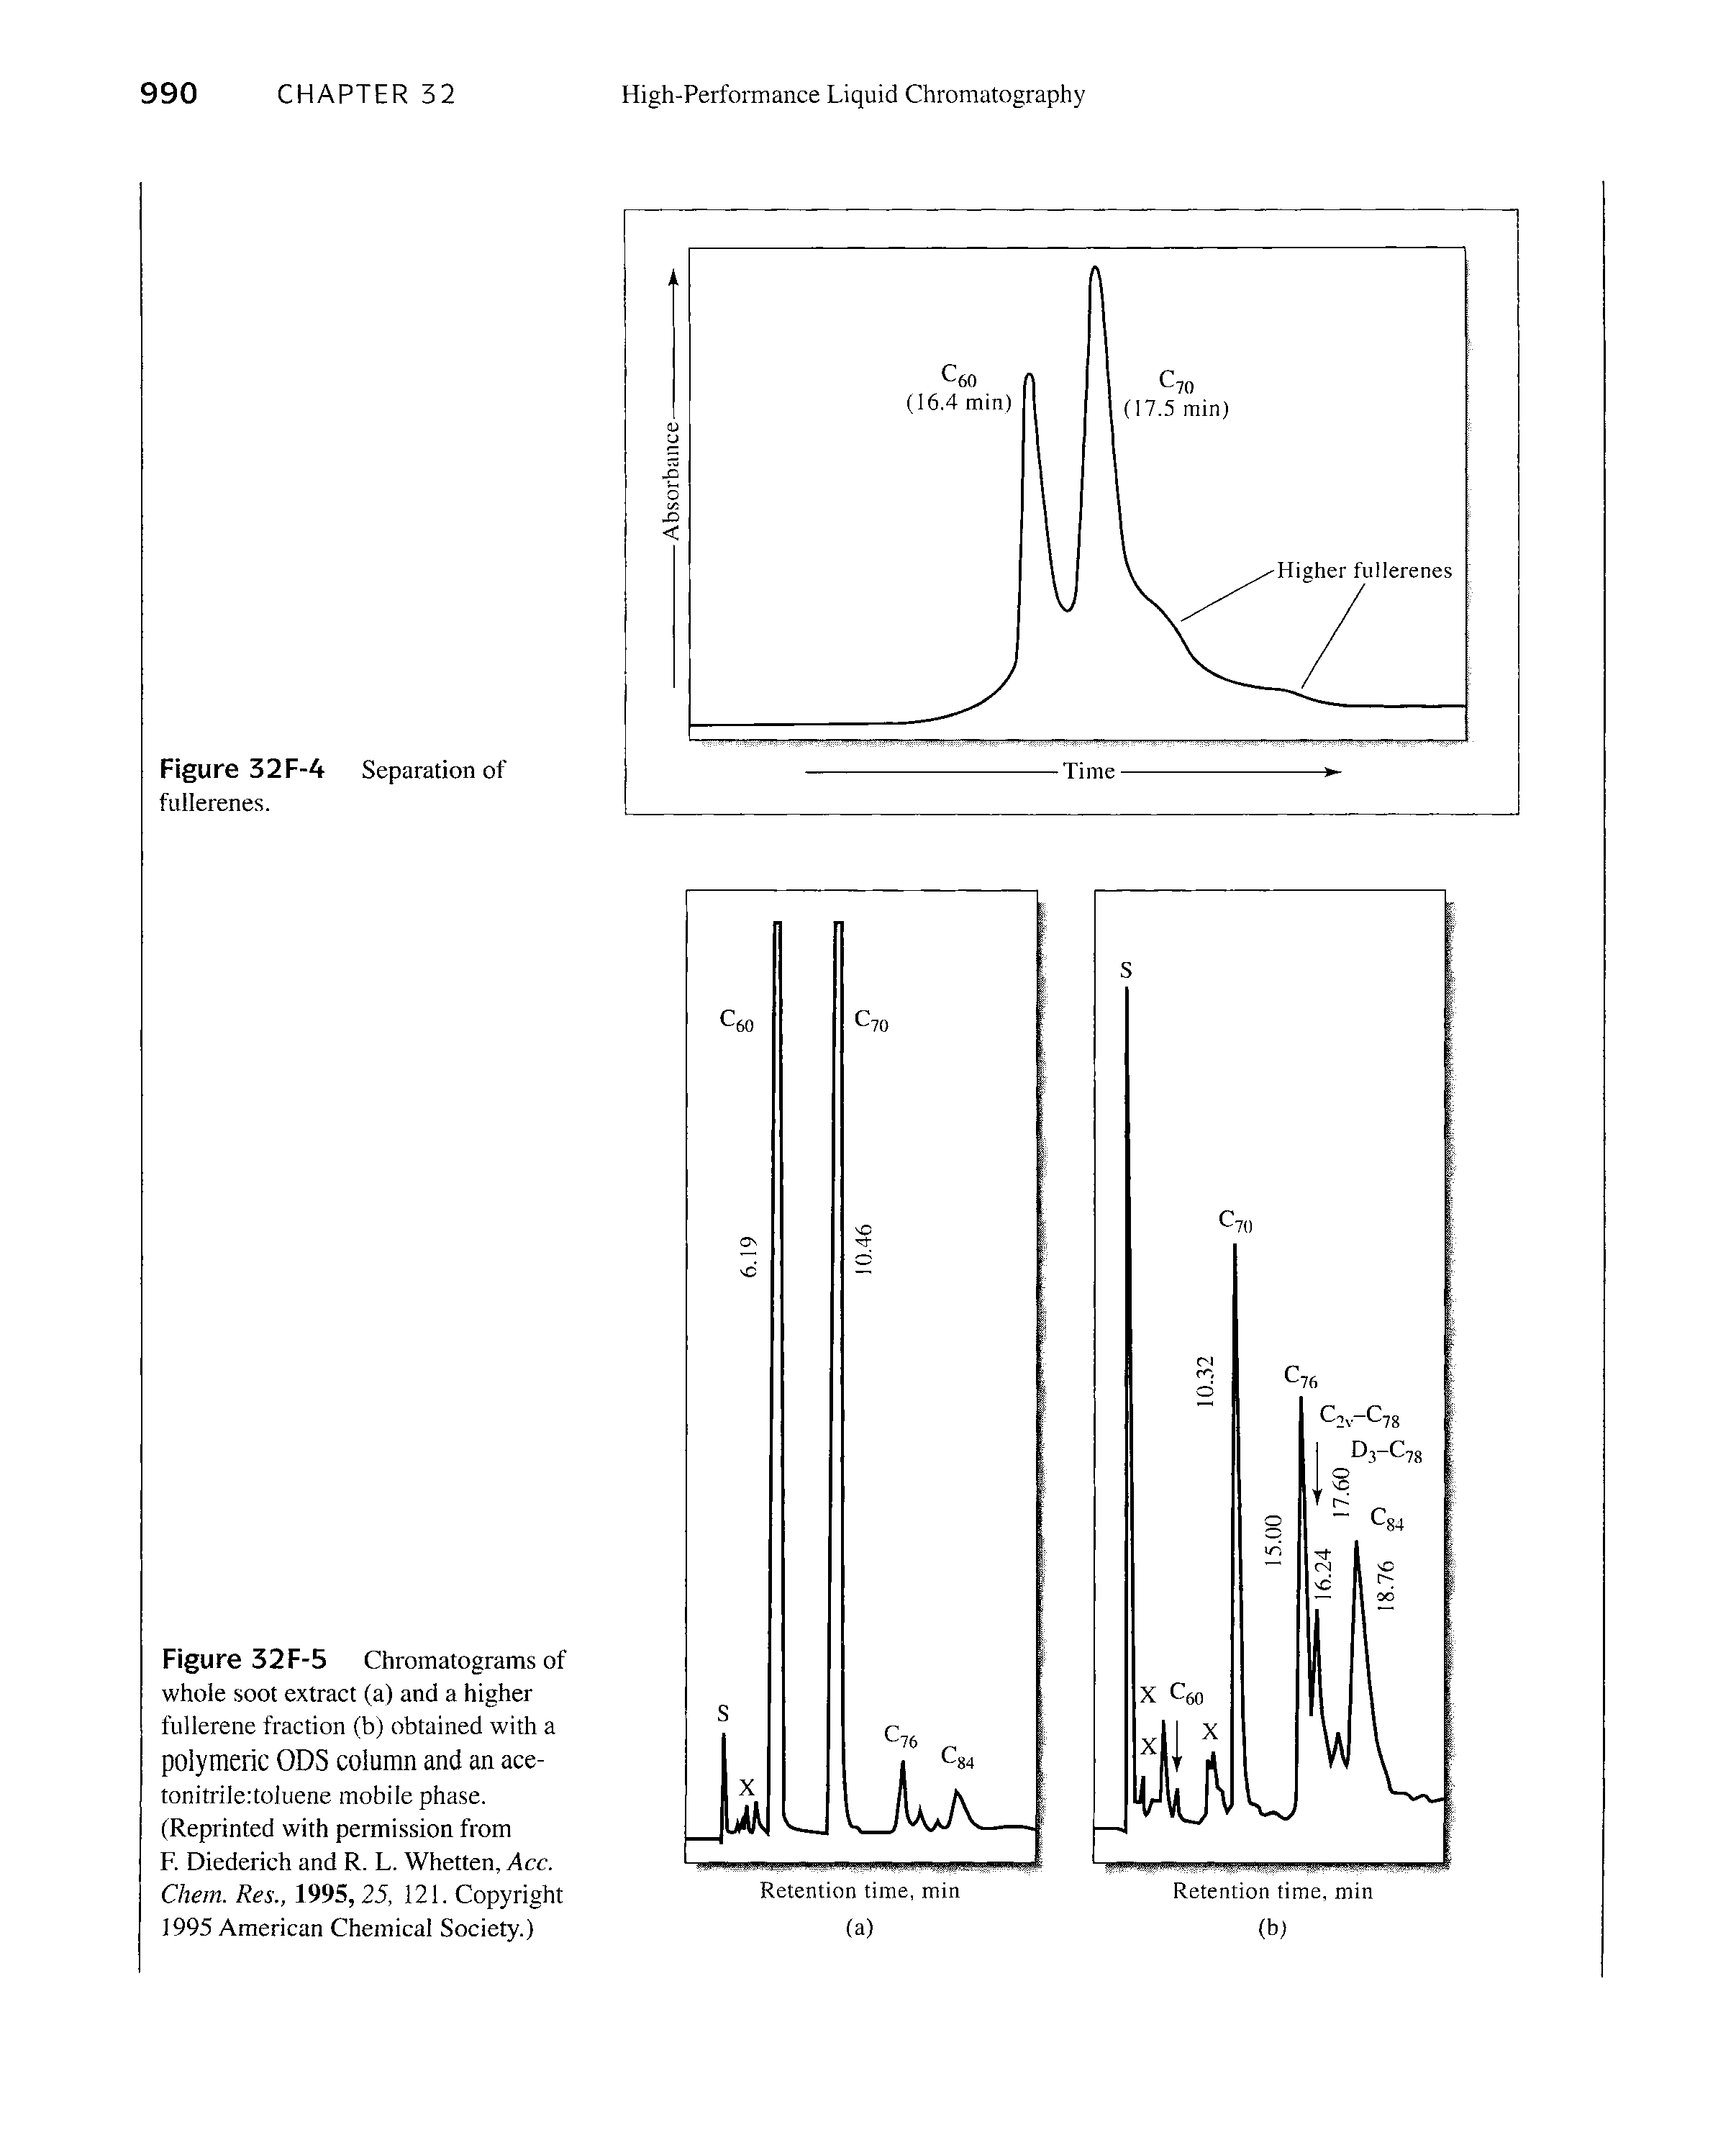 Figure 32F-5 Chromatograms of whole soot extract (a) and a higher fiillerene fraction (b) obtained with a polymeric ODS column and an ace-tonitriledoluene mobile phase. (Reprinted with permission from F. Diederich and R. L. Whetten, Acc. Chem. Res., 1995, 25, 121. Copyright 1995 American Chemical Society.)...